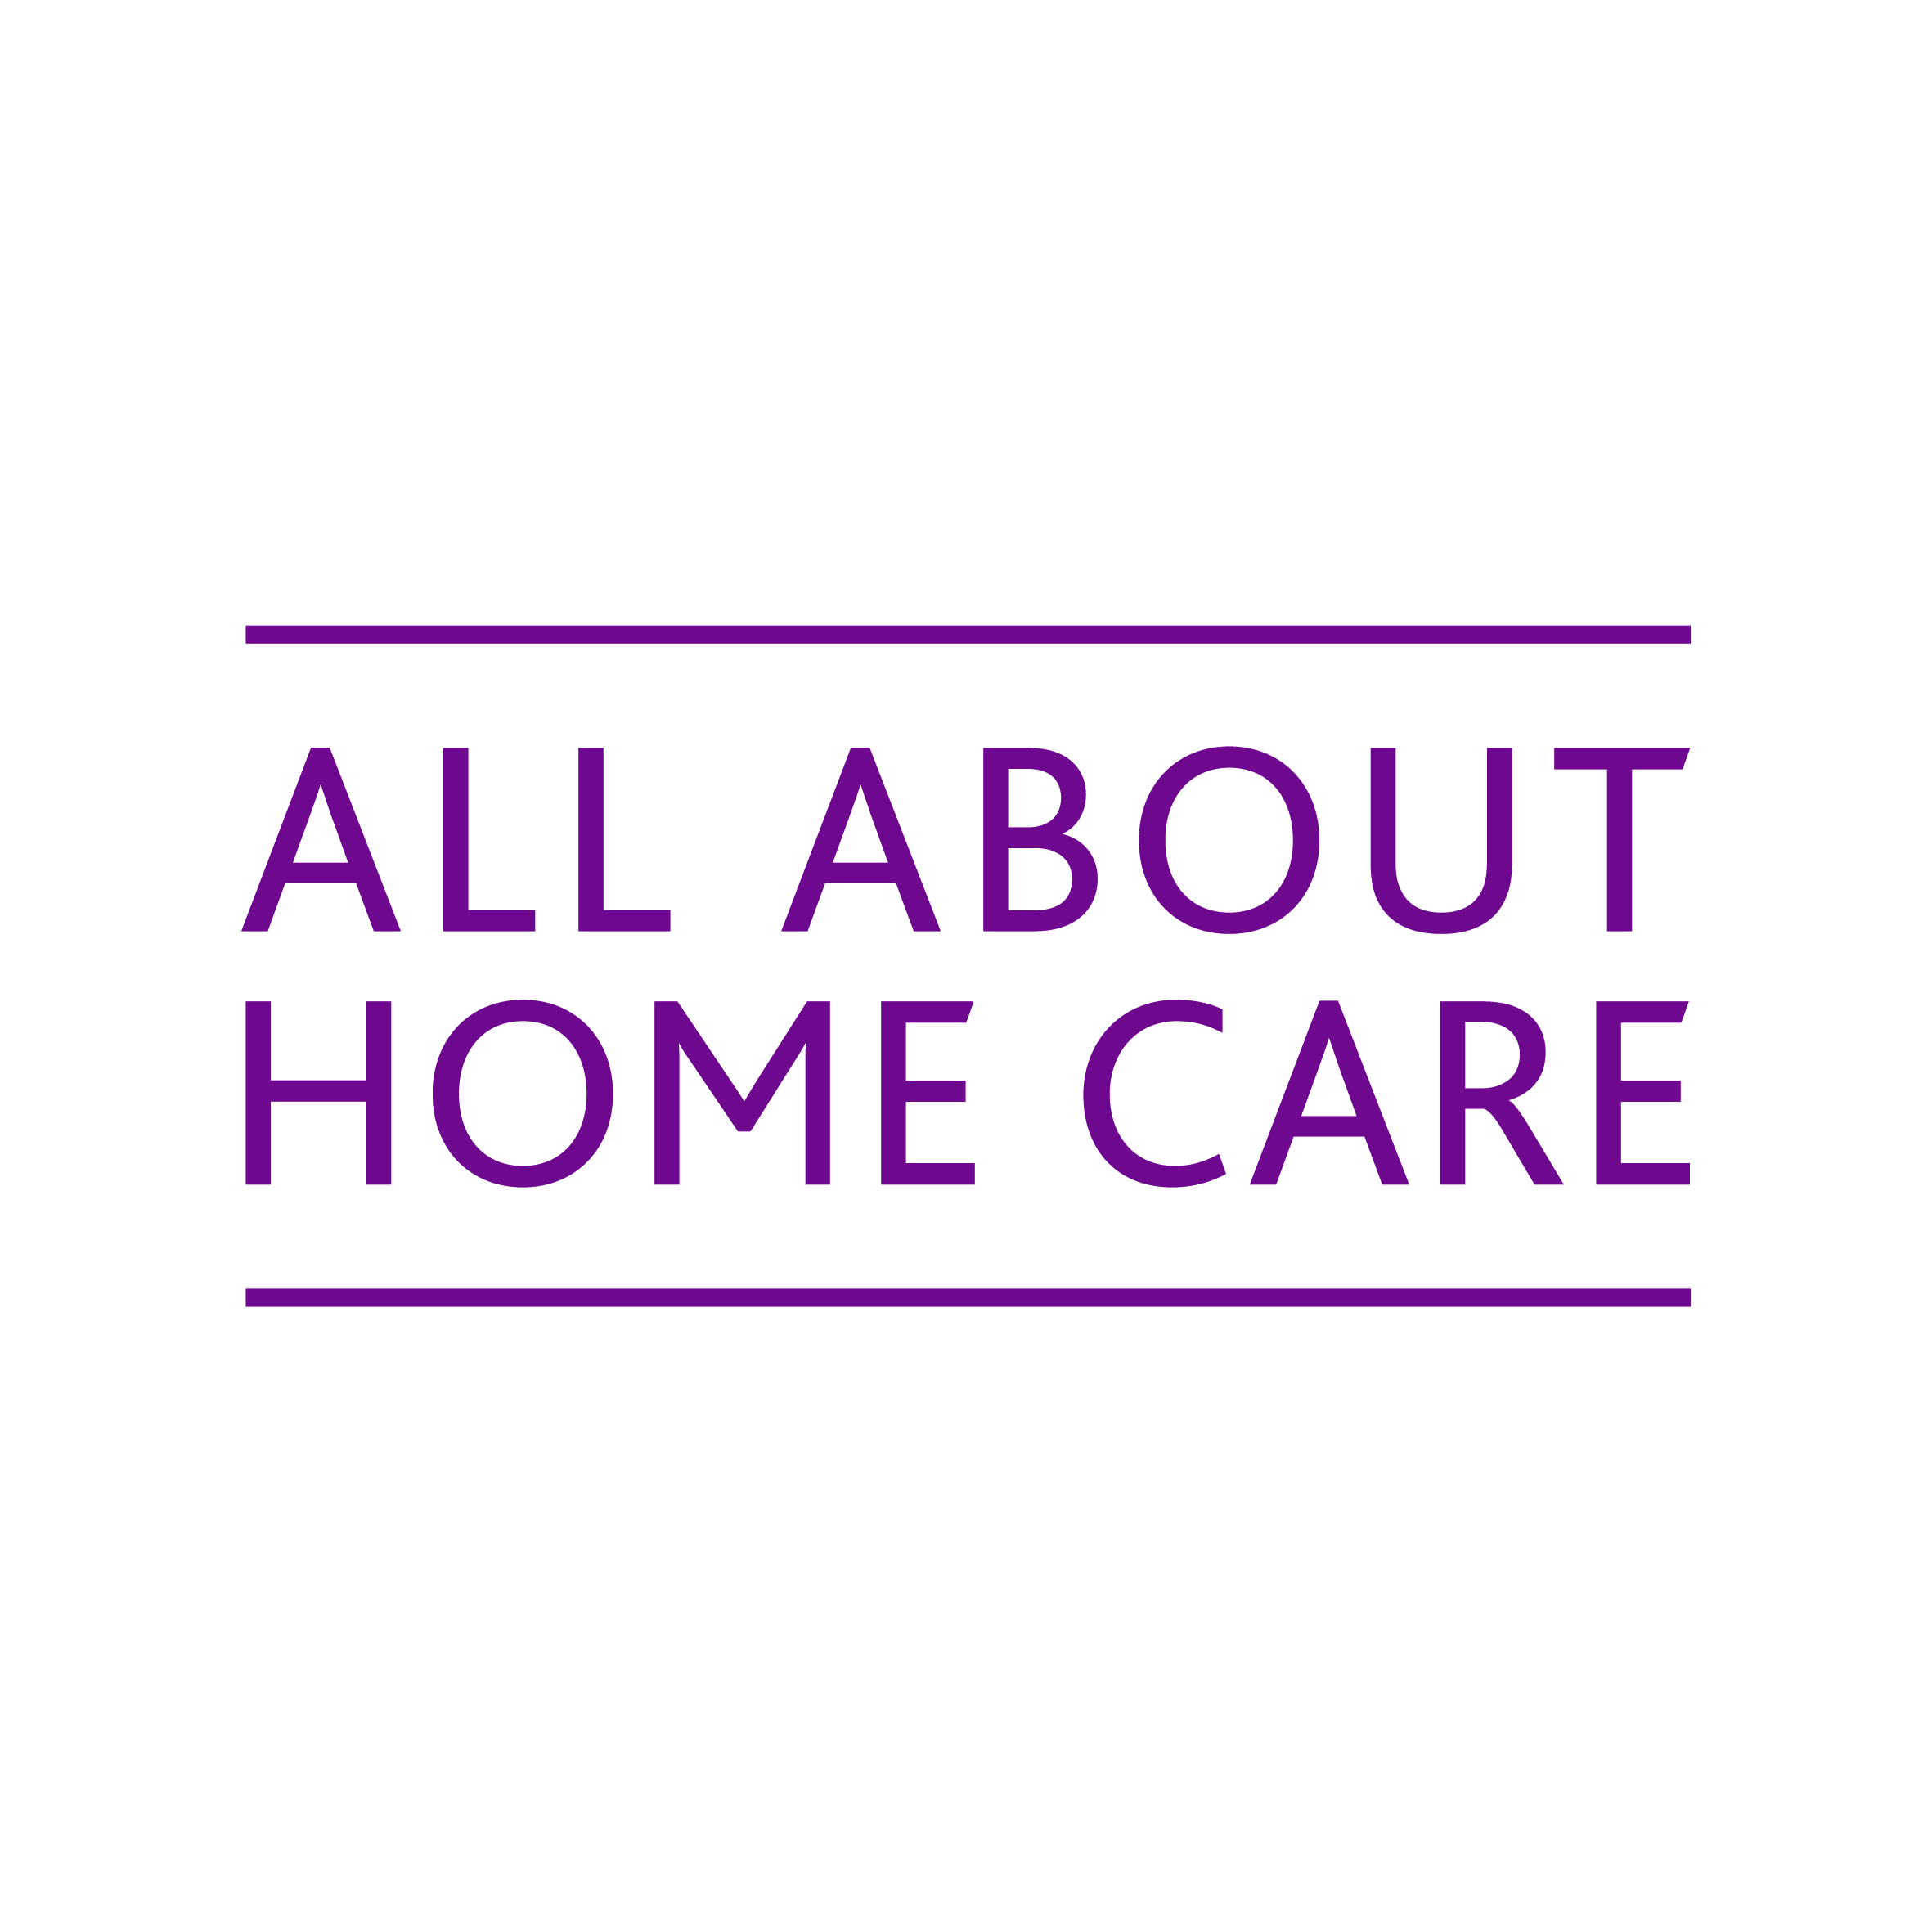 All About Home Care primary logo - CMYK - berry-01 - Copy.jpg